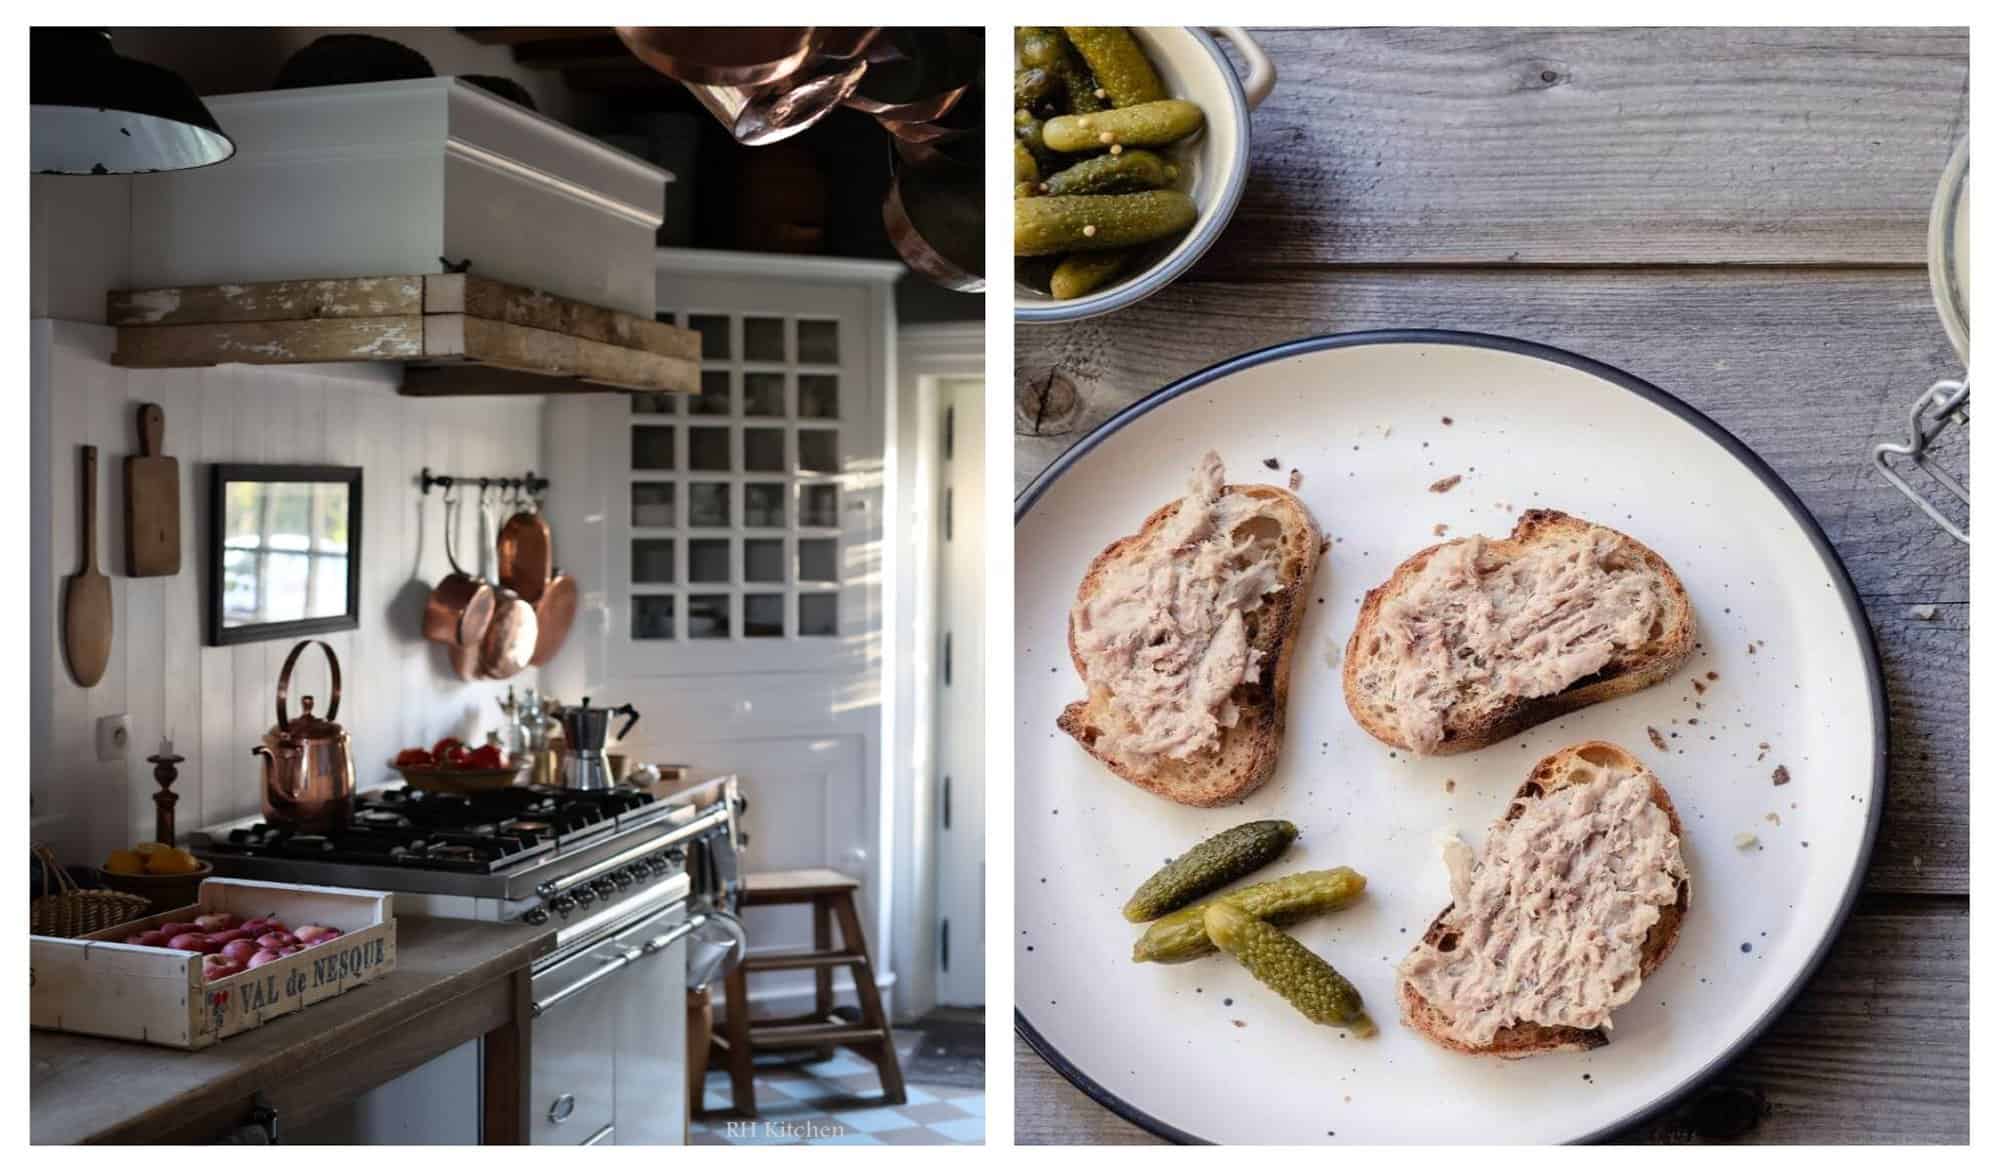 Left: A French kitchen with apples in a box on the counter next to the stove. There is a copper kettle on the stove and copper pans hanging nearby. Right: A plate of rillette on bread and cornichons, ready to eat.